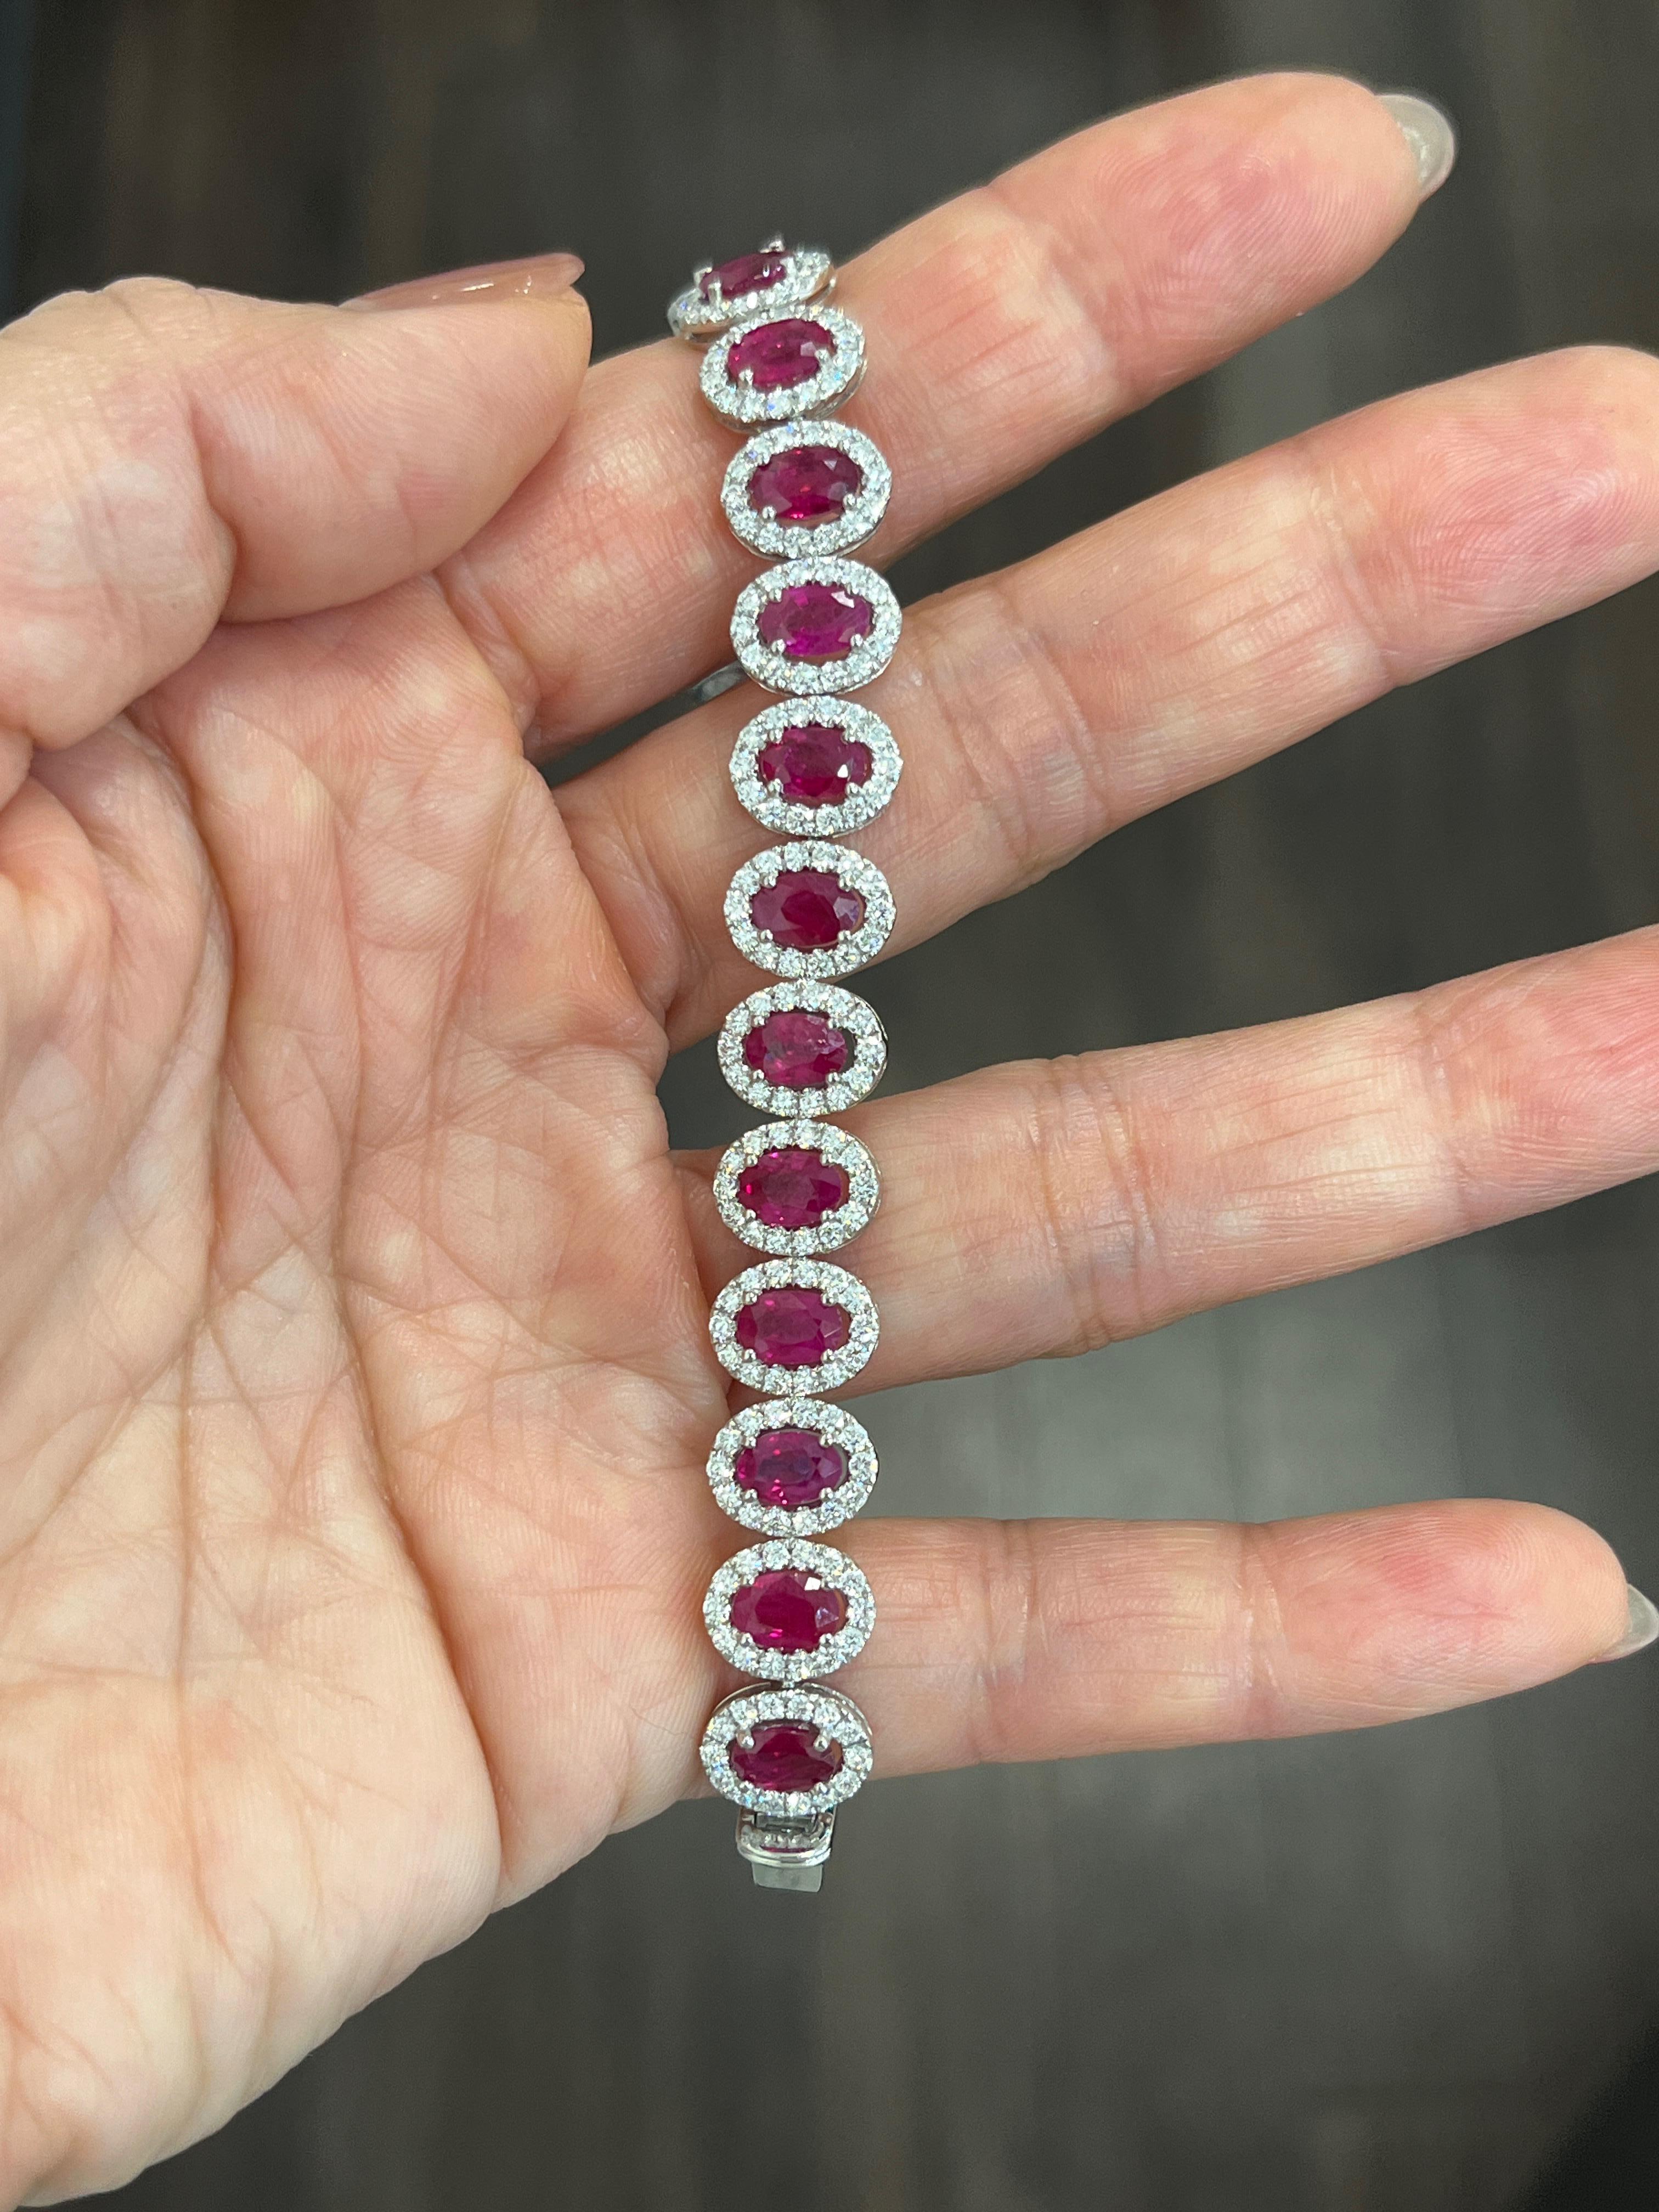 This gorgeous 16.39 ct natural ruby and diamond bracelet boasts 22 natural rubies for 12.02 ct and 308 diamonds for 4.37 ct. The diamonds are E/F in color and VS1/VS2 in clarity. A showstopper to any wardrobe. 